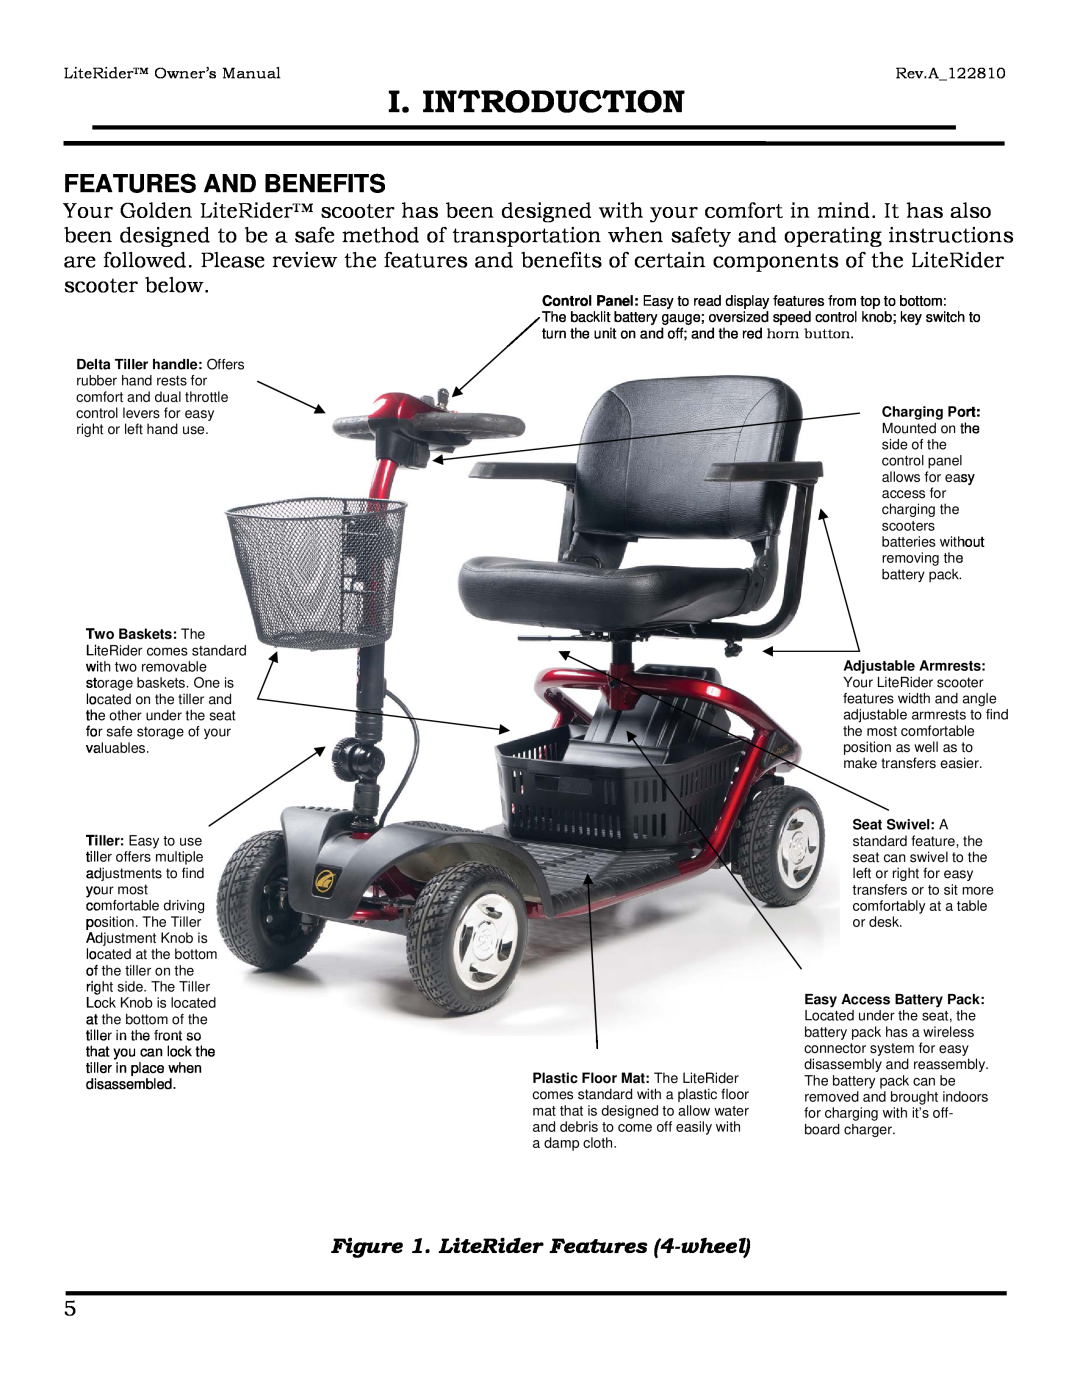 Golden Technologies GL140 Features And Benefits, LiteRider Features 4-wheel, I. Introduction, LiteRider Owner’s Manual 